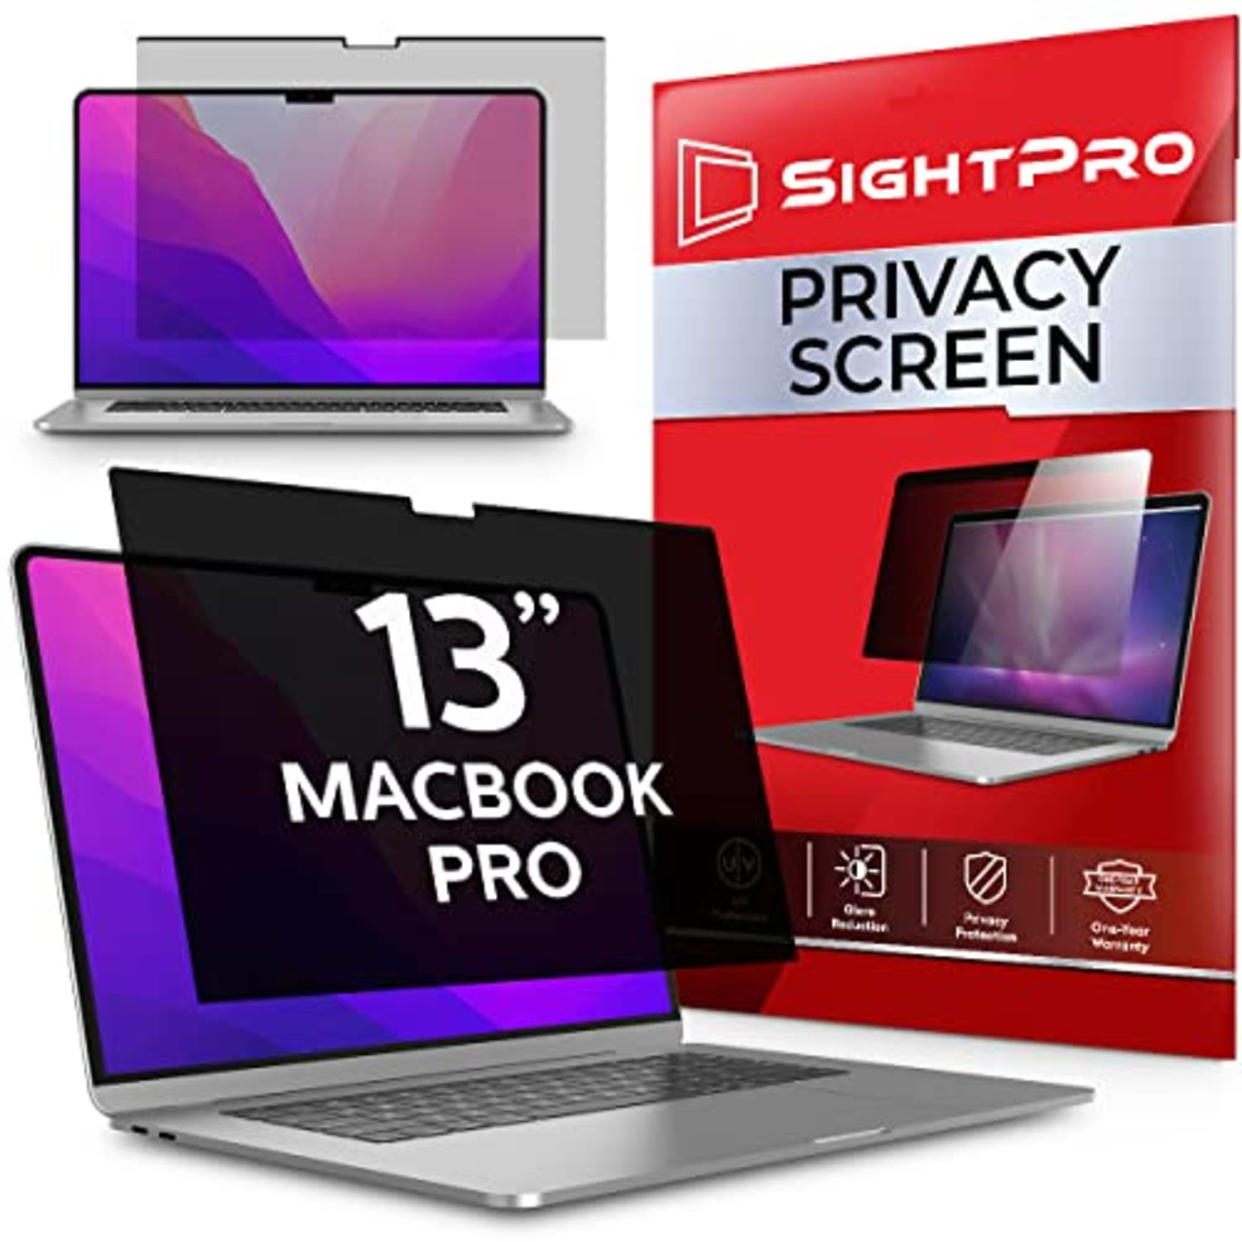 SightPro Magnetic Privacy Screen for MacBook Pro 13 Inch (2016, 2017, 2018, 2019, 2020, 2021, 2022, M1, M2) Laptop Privacy Filter and Anti-Glare Protector (AMAZON)